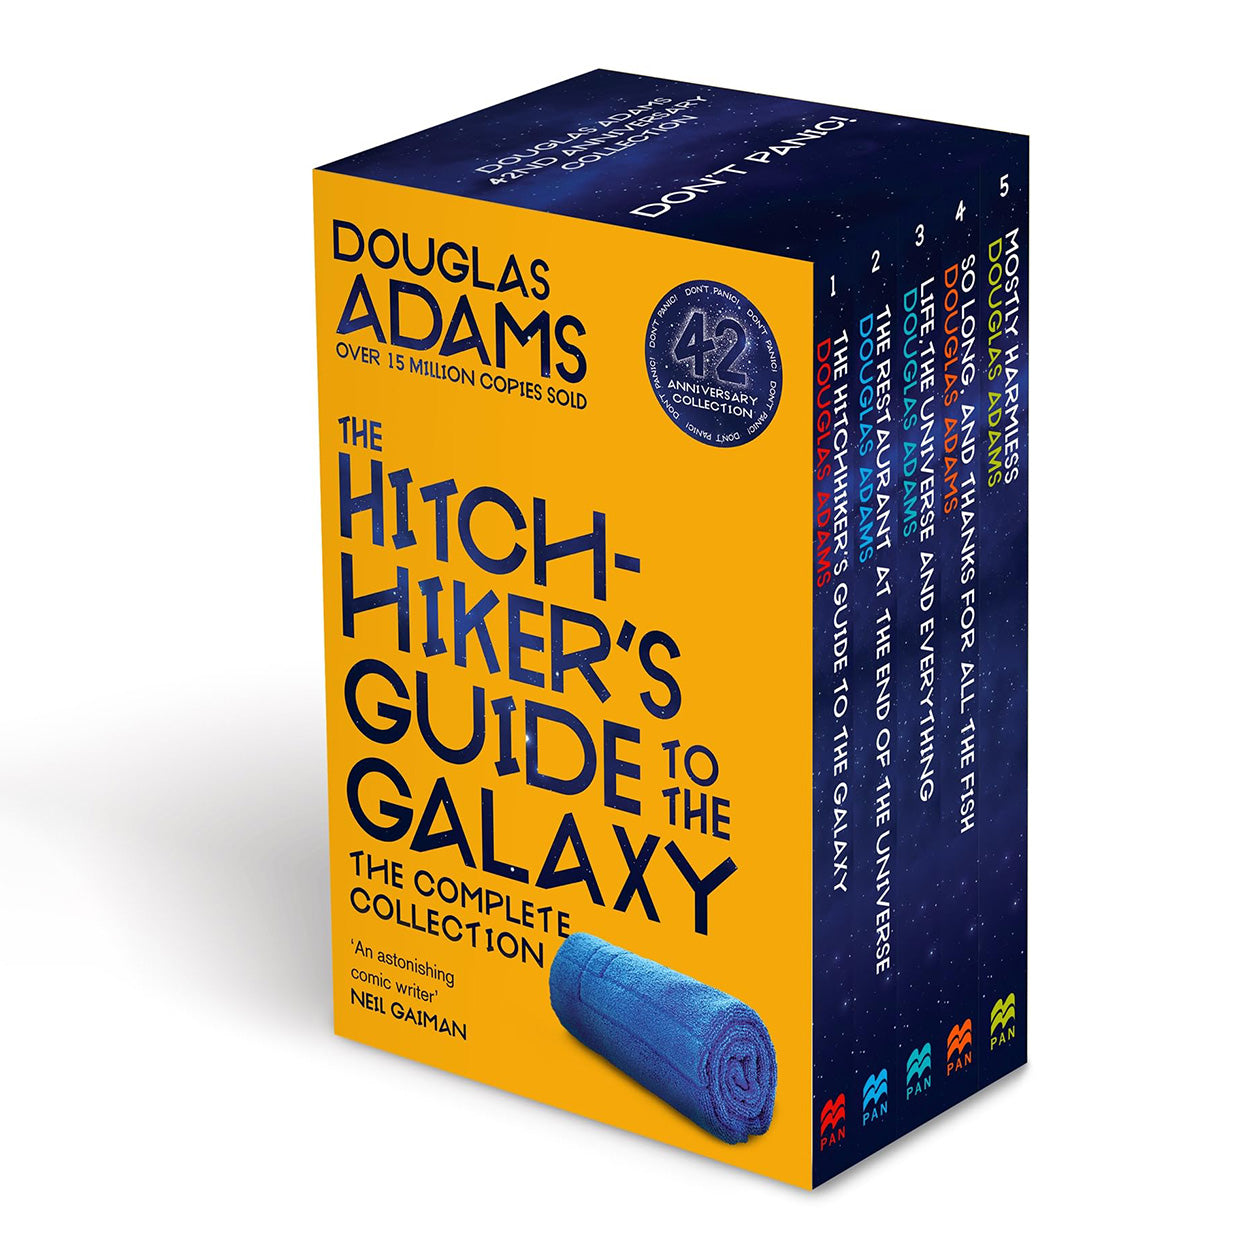 to　The　Guide　Online　Complete　Galaxy　Library　Boxset　Hitchhiker's　British　the　Shop